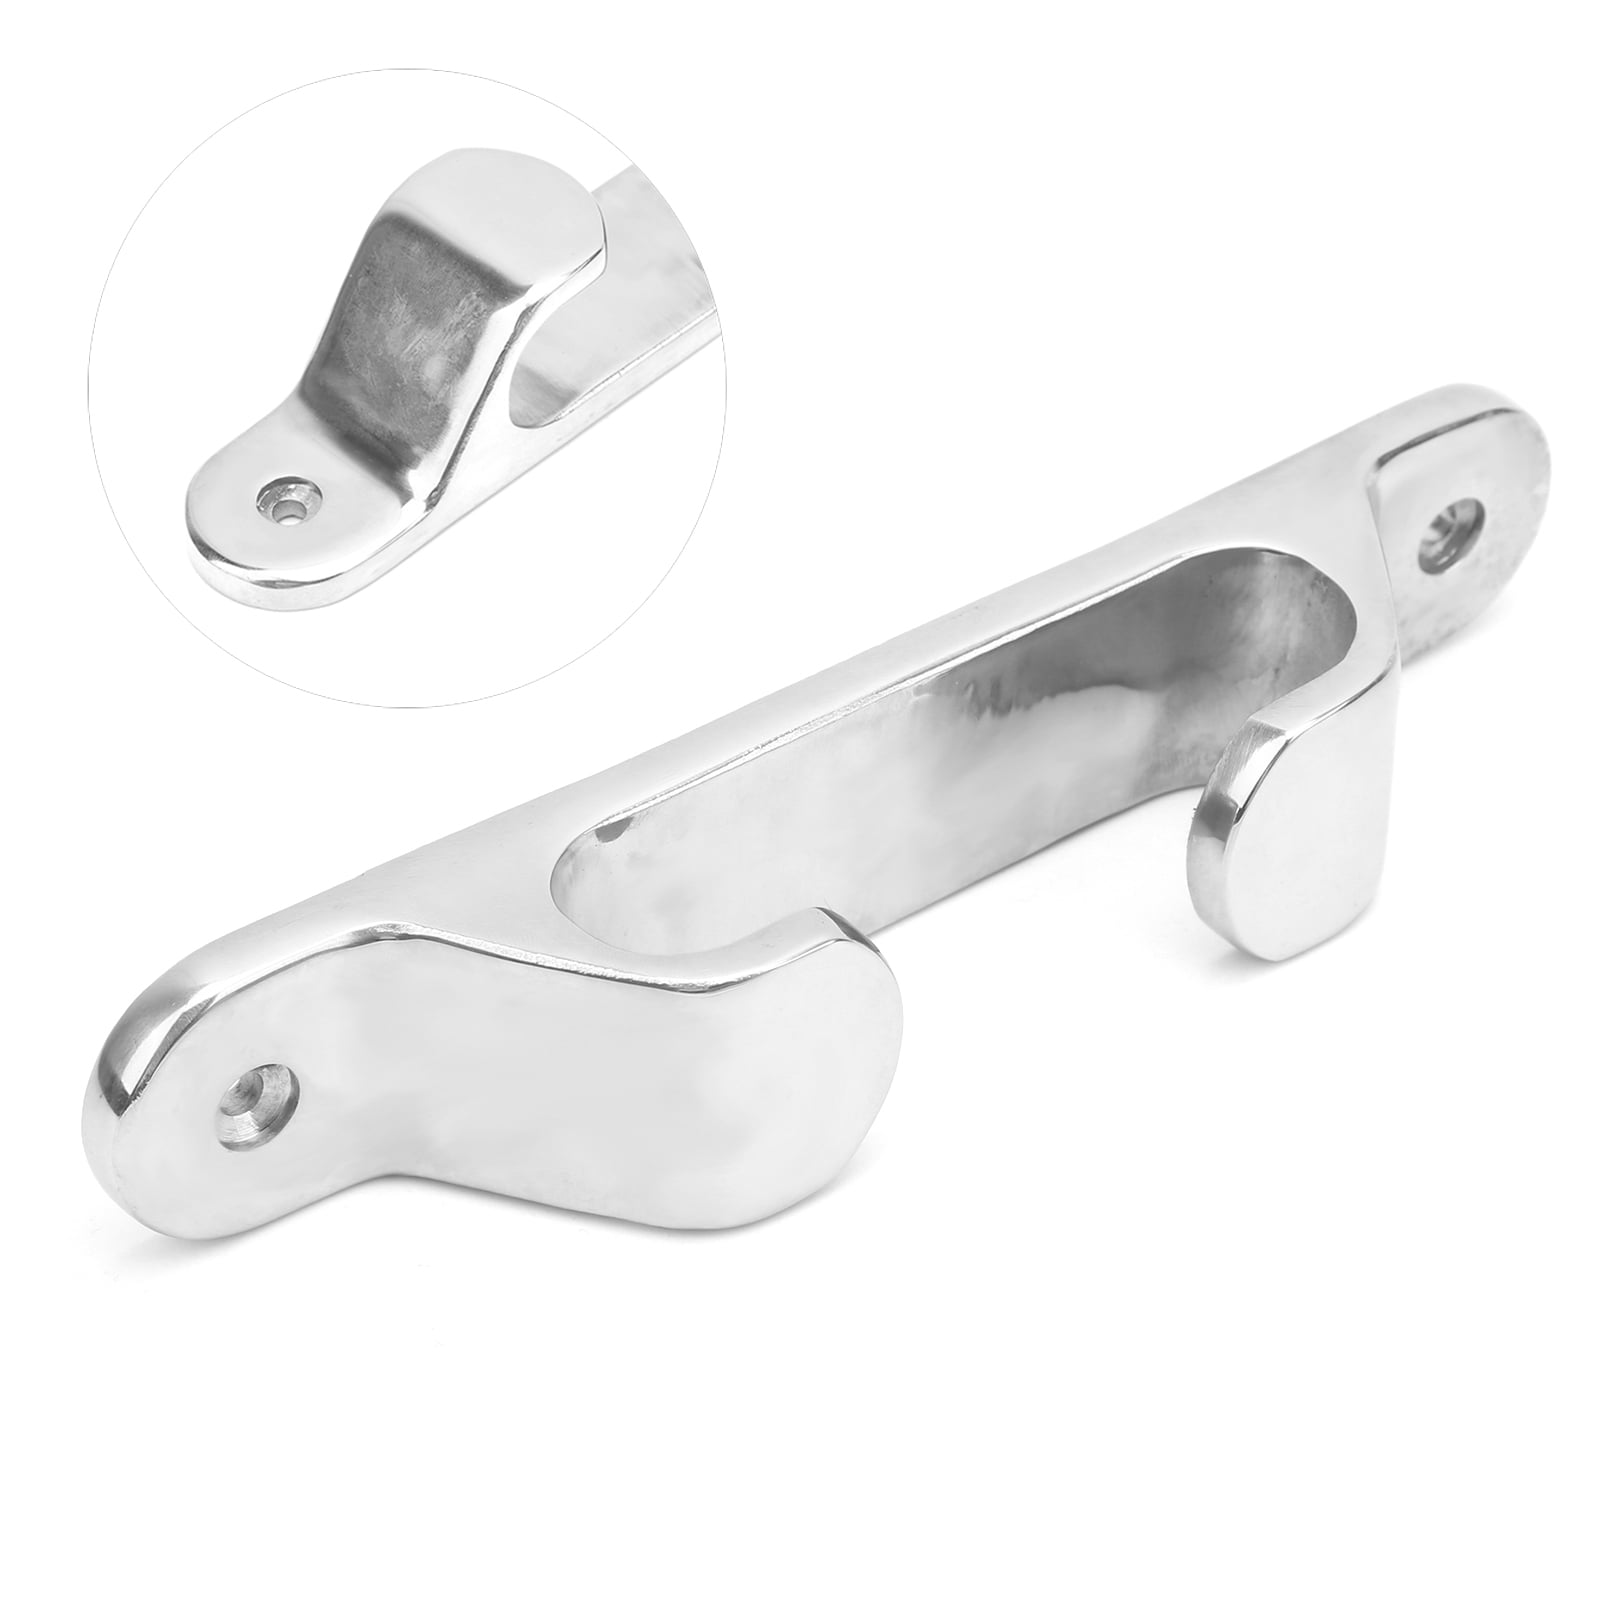 Anti‑Corrosion Boat Bow Chocks Durable Boat Fairlead Dock Cleats Boat Cleat Rugged Mooring Cleat for Boat for Boat Accessory